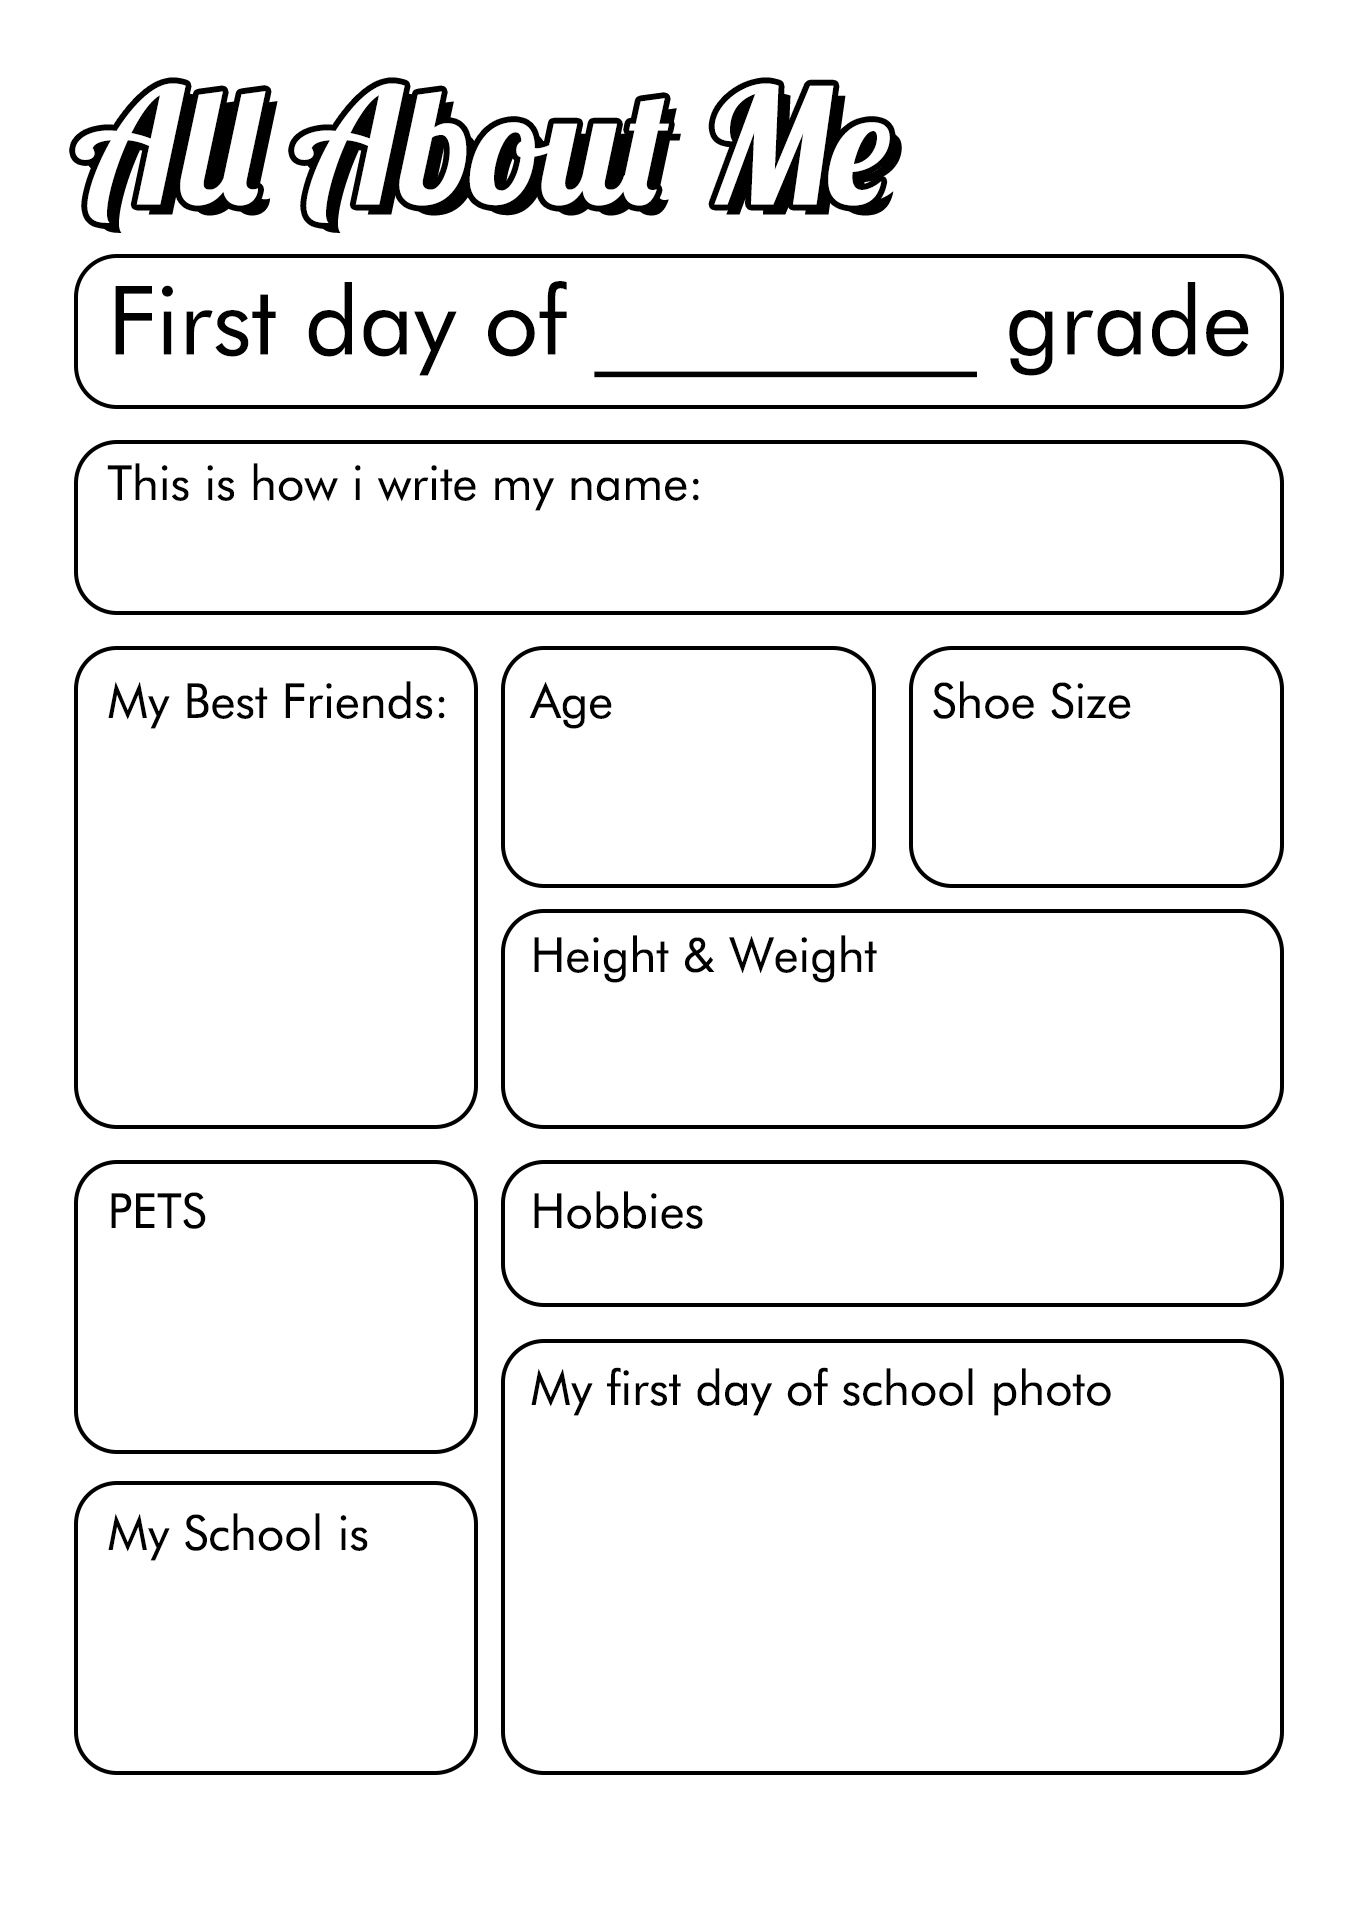 All About Me Worksheets First Day of School